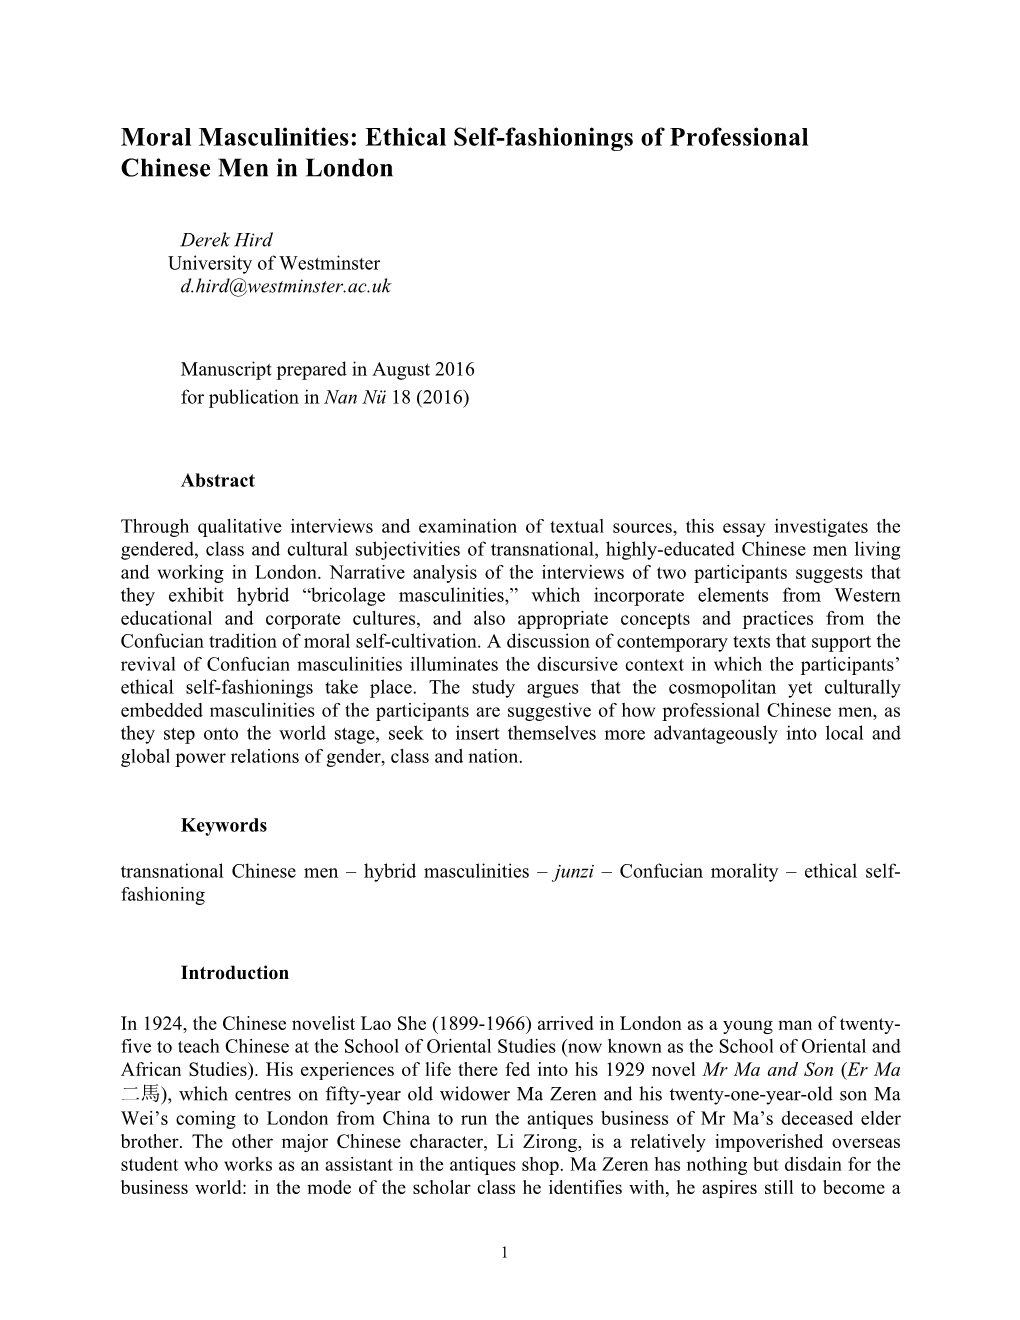 Moral Masculinities: Ethical Self-Fashionings of Professional Chinese Men in London